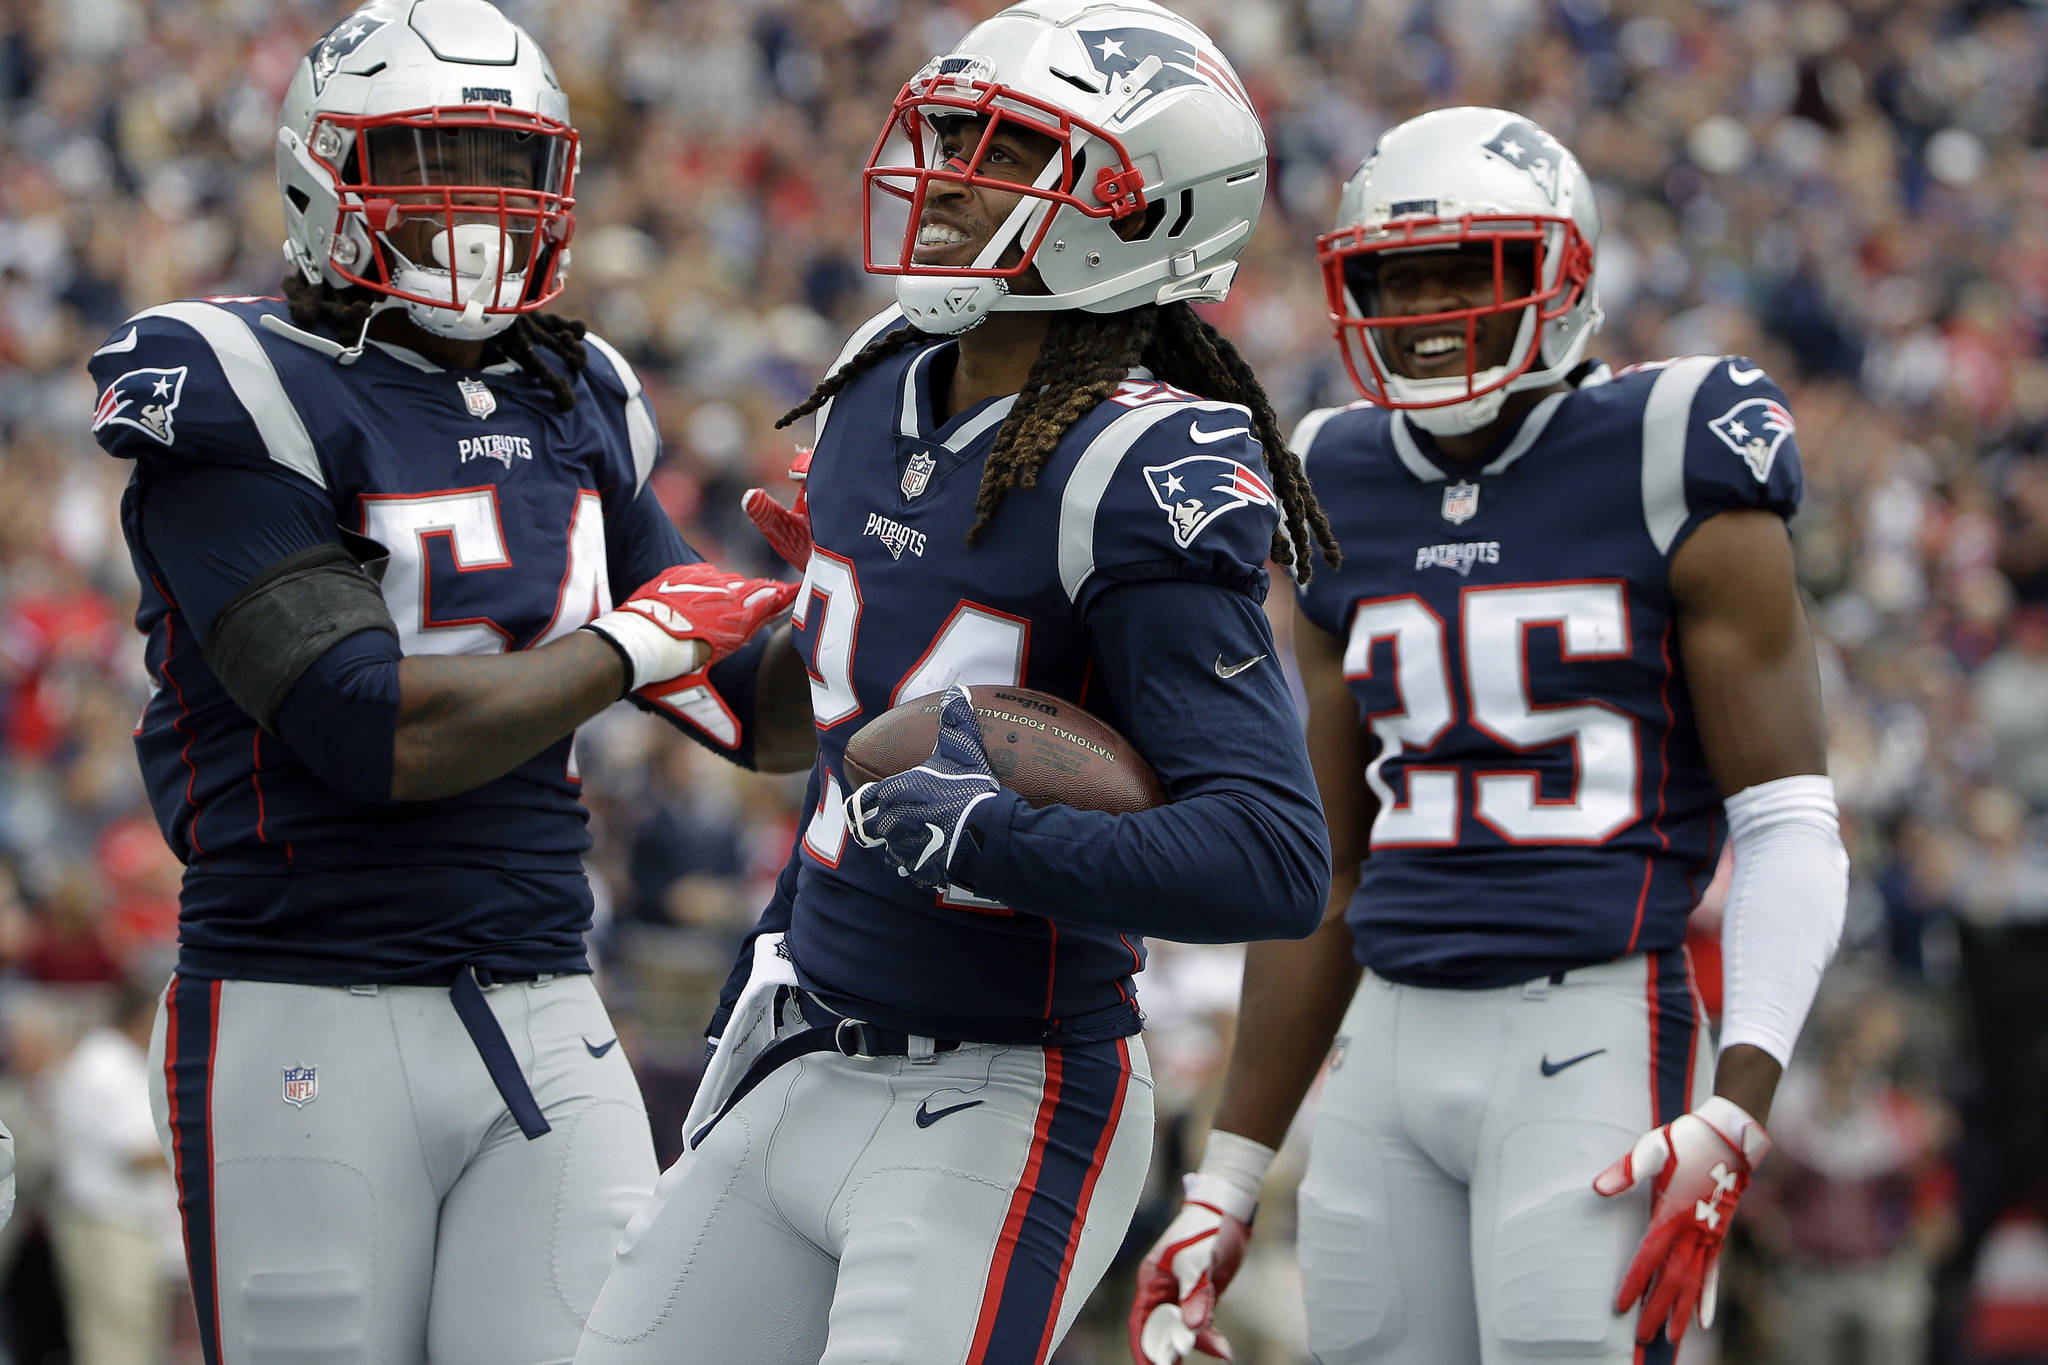 FILE - In this Sept. 9, 2018, file photo, New England Patriots defensive back Stephon Gilmore, center, celebrates his interception with Dont’a Hightower, left, and Eric Rowe, right, during the first half of an NFL football game against the Houston Texans in Foxborough, Mass. (AP Photo/Steven Senne, File)